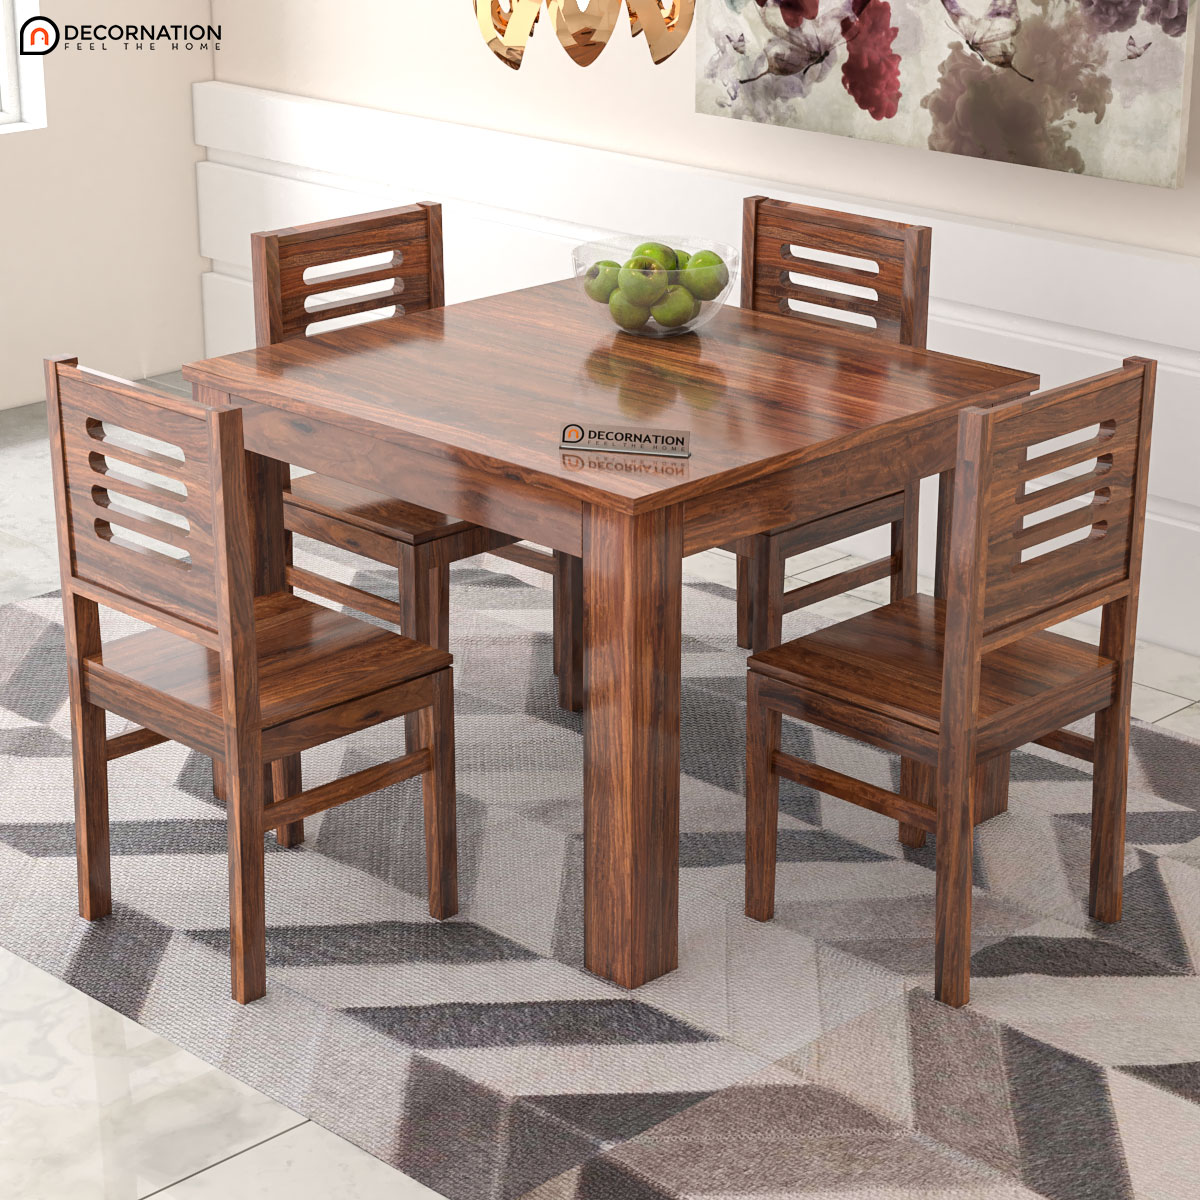 Diest Wooden 4 Seater Dining Table Set, 4 Seat Dining Room Table And Chairs